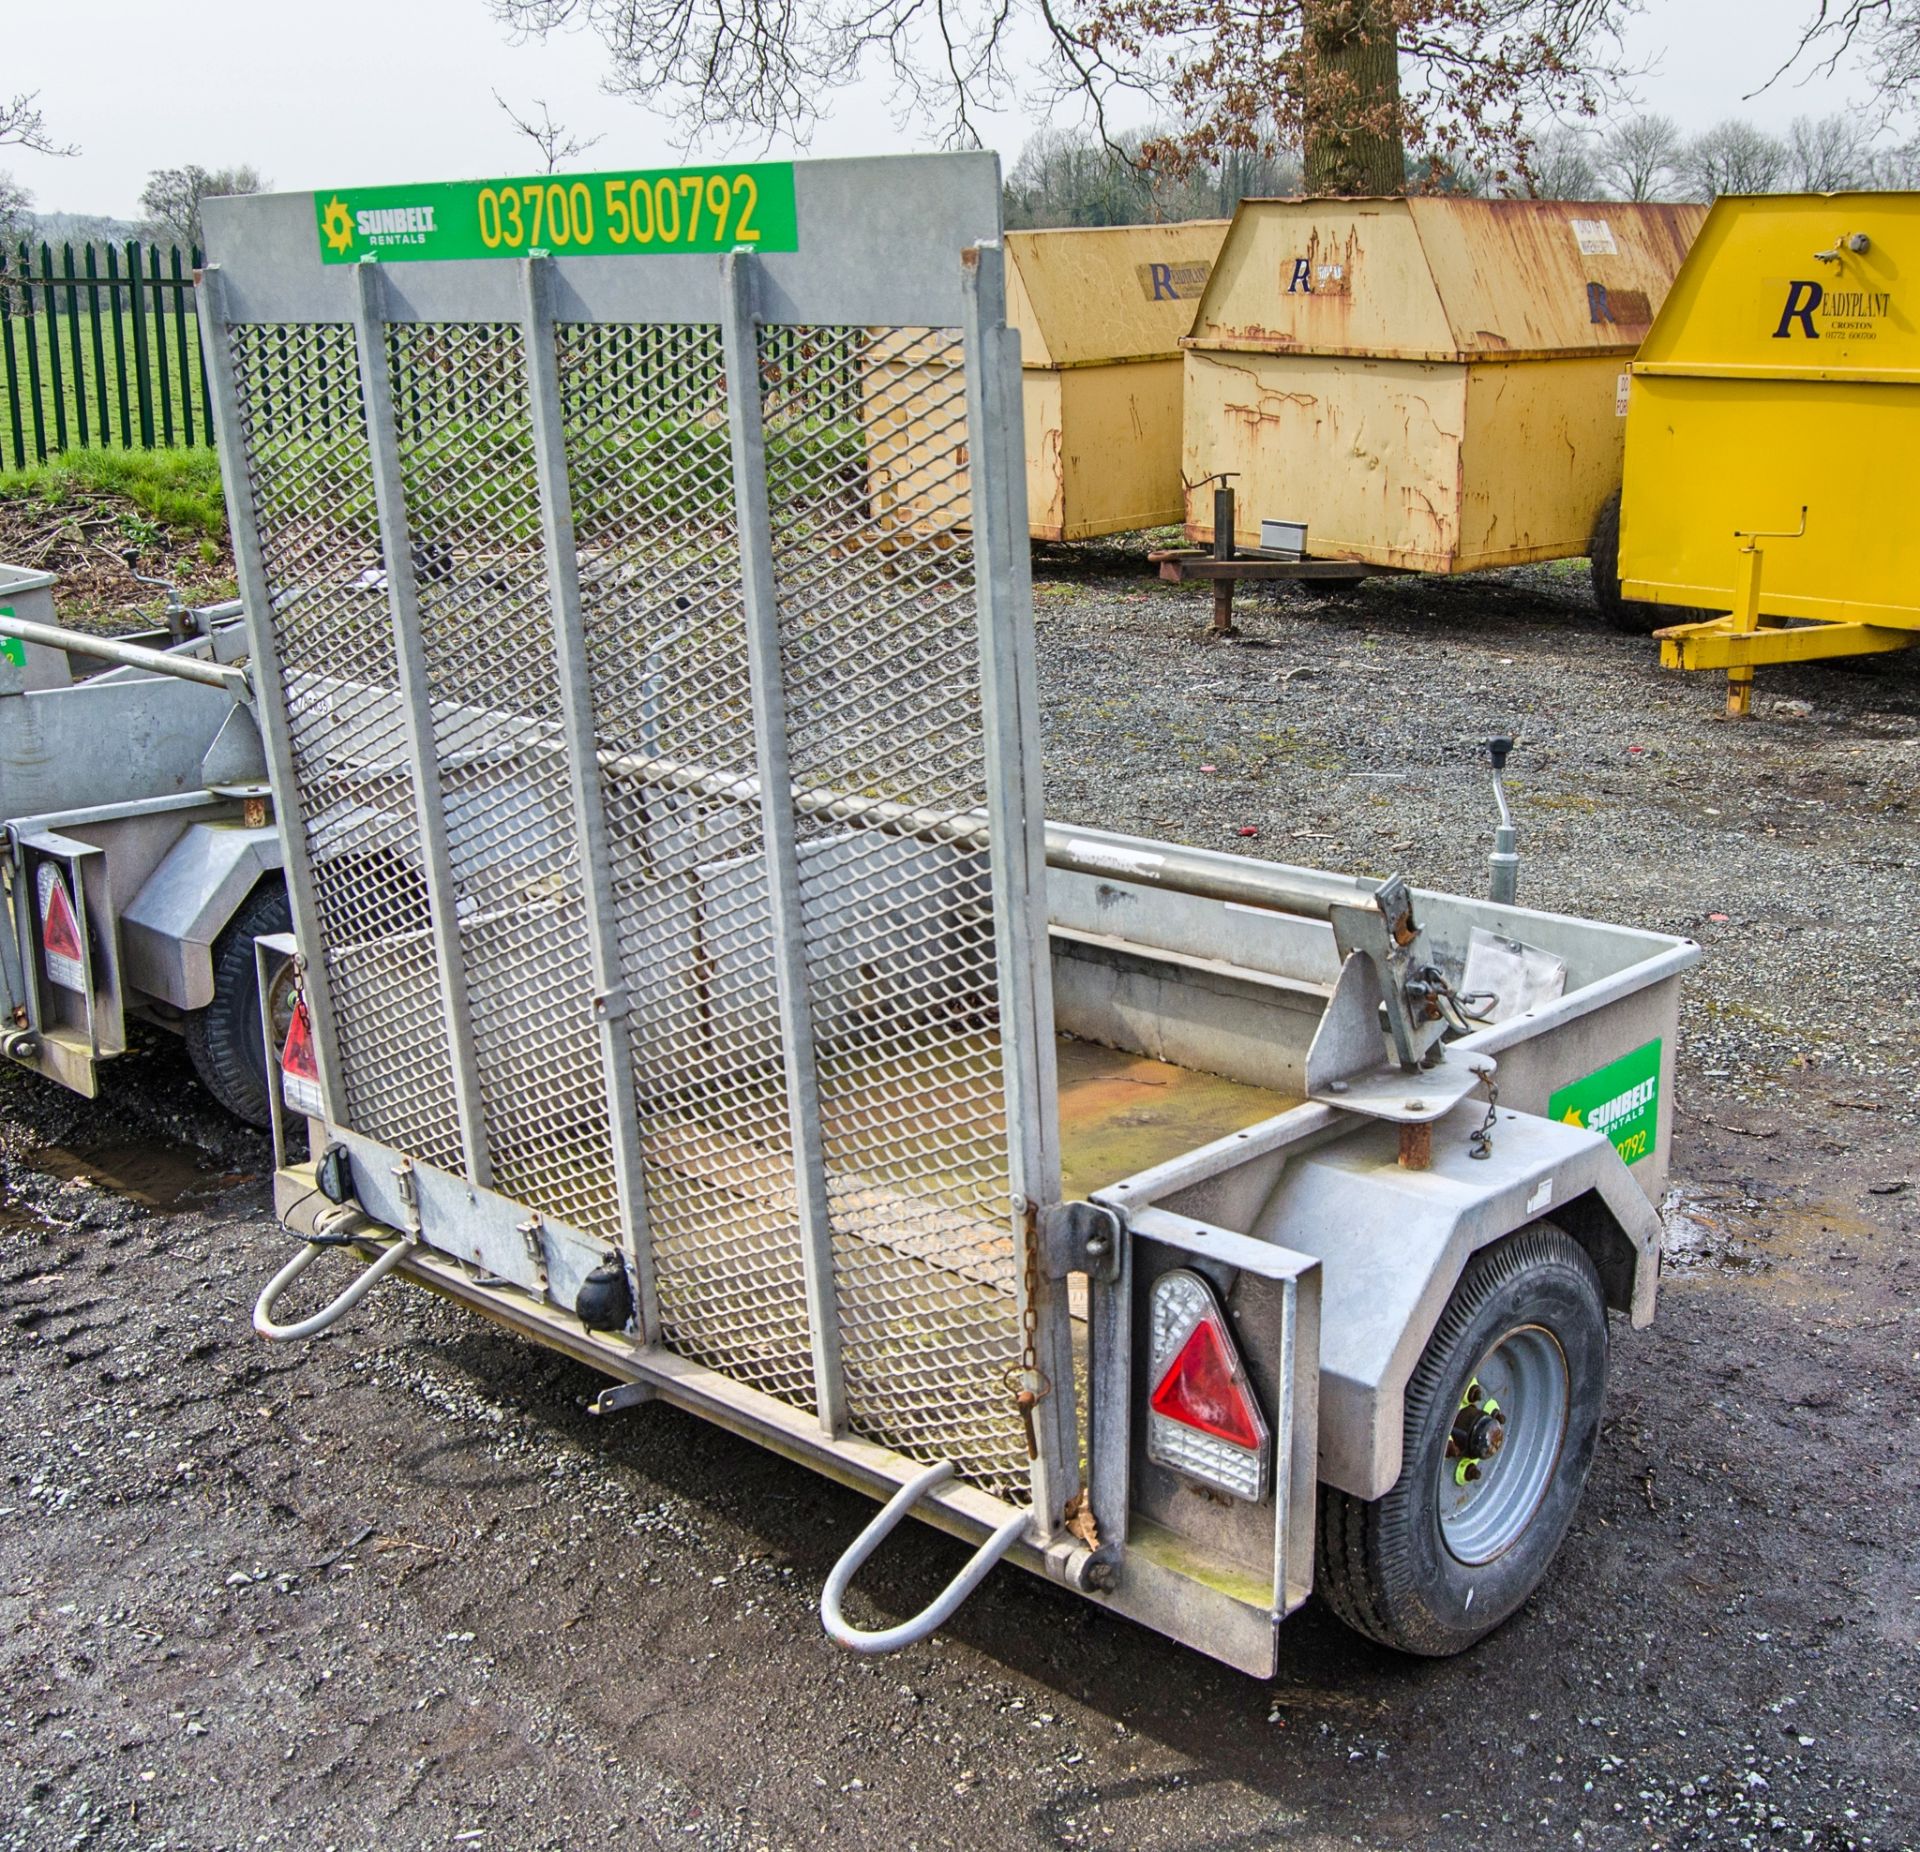 Hazlewood single axle traffic light trailer Bed size: 4ft 7 inch wide x 4ft long A786537 - Image 3 of 5